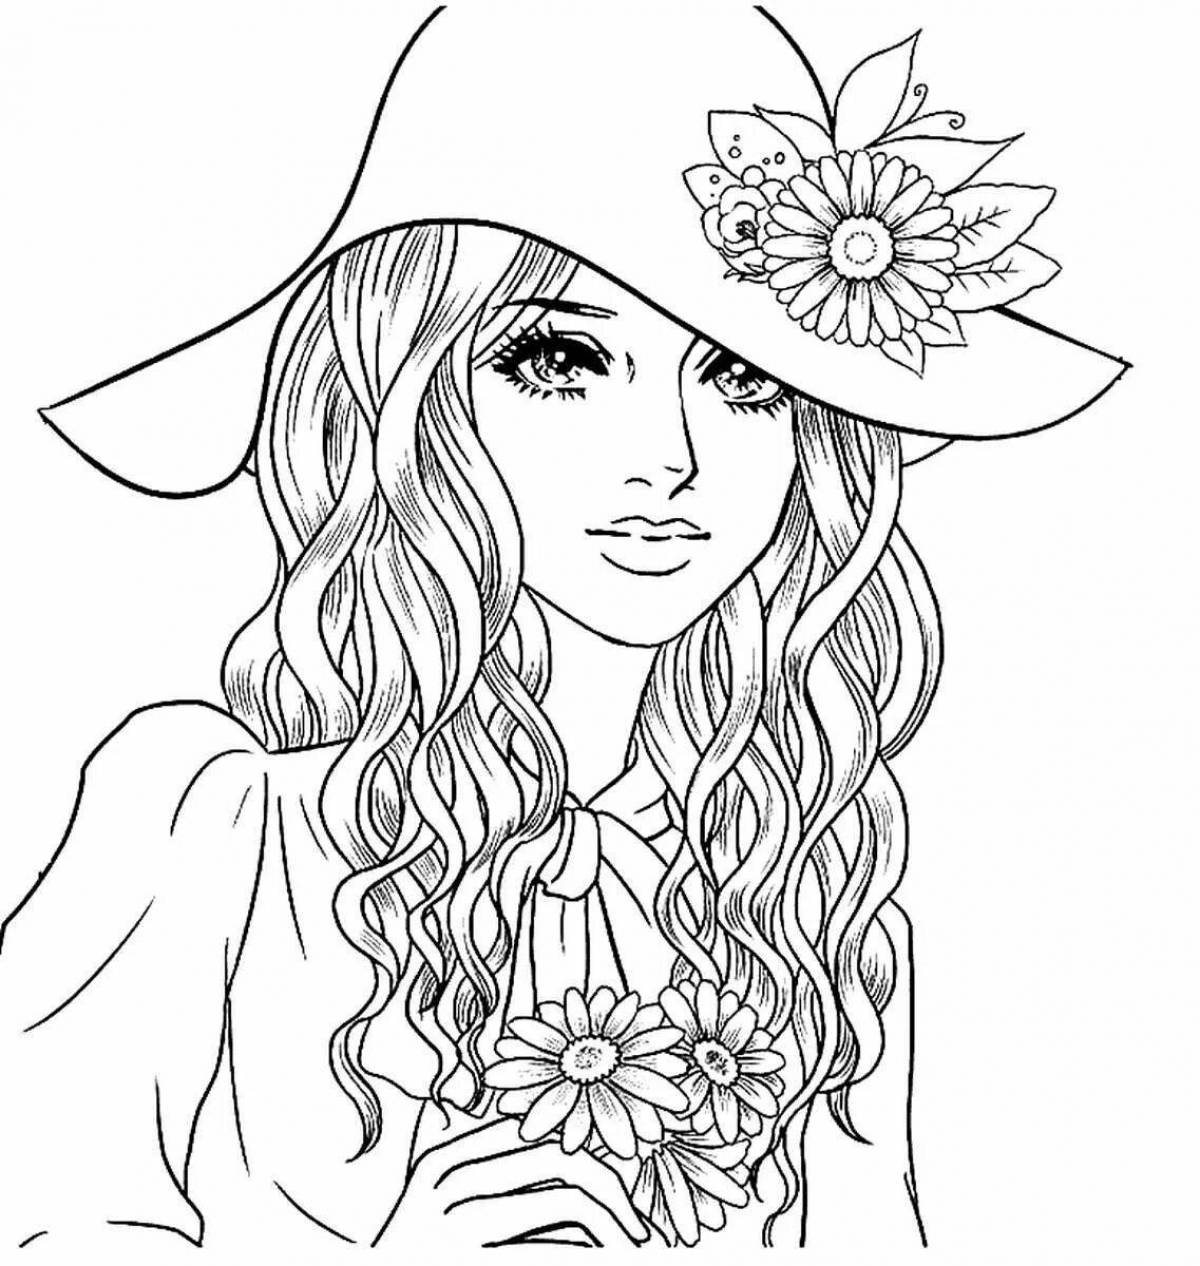 Radiant coloring page girls 12 years old fashion